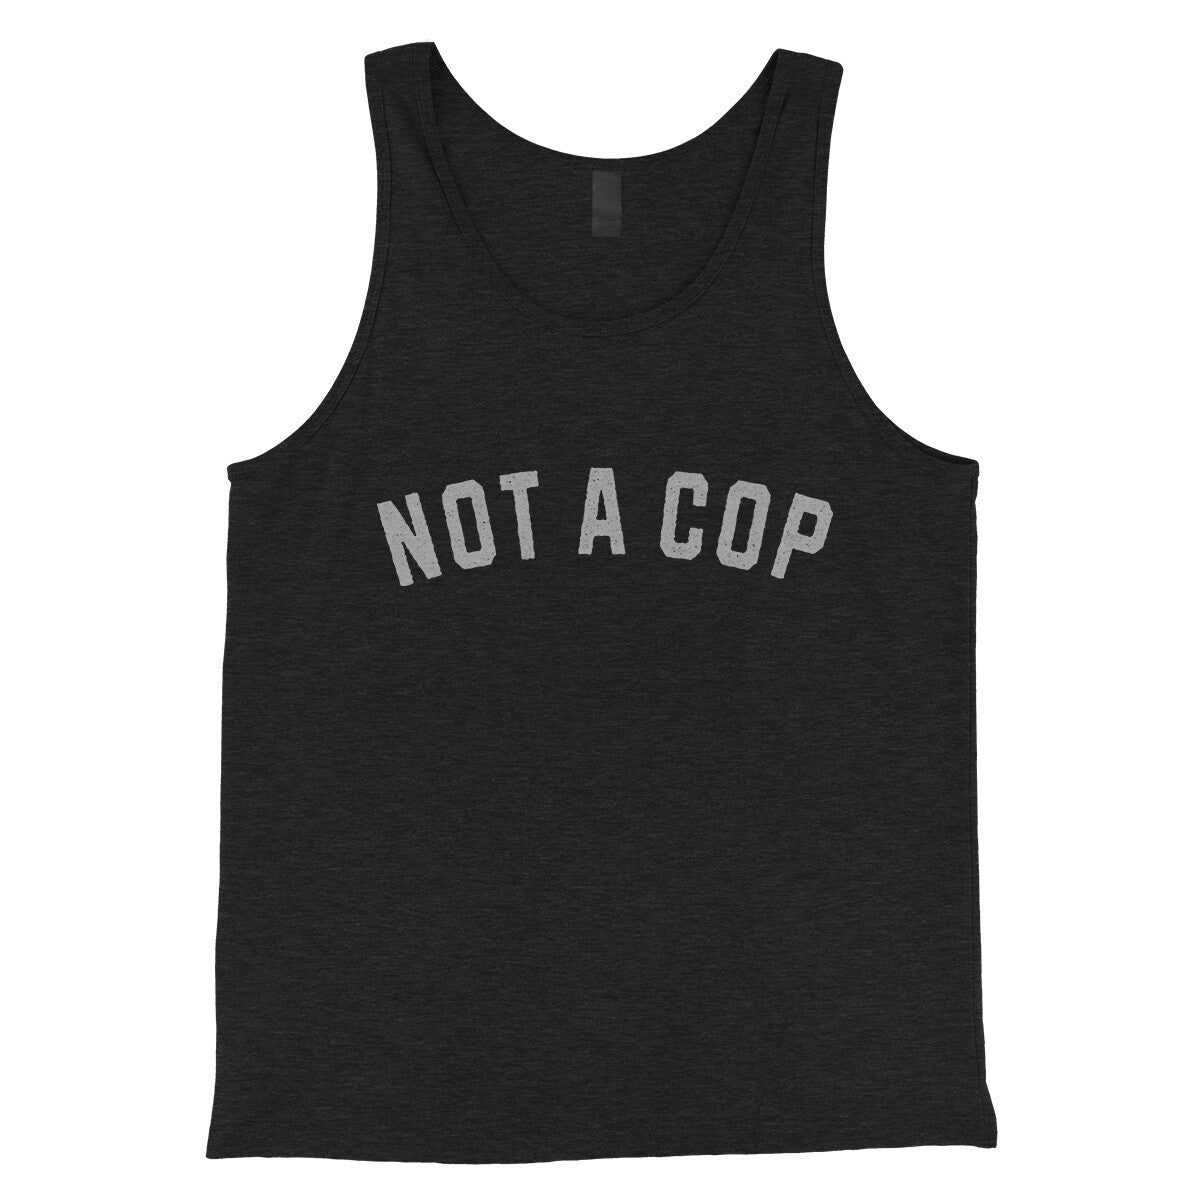 Not a Cop in Charcoal Black TriBlend Color